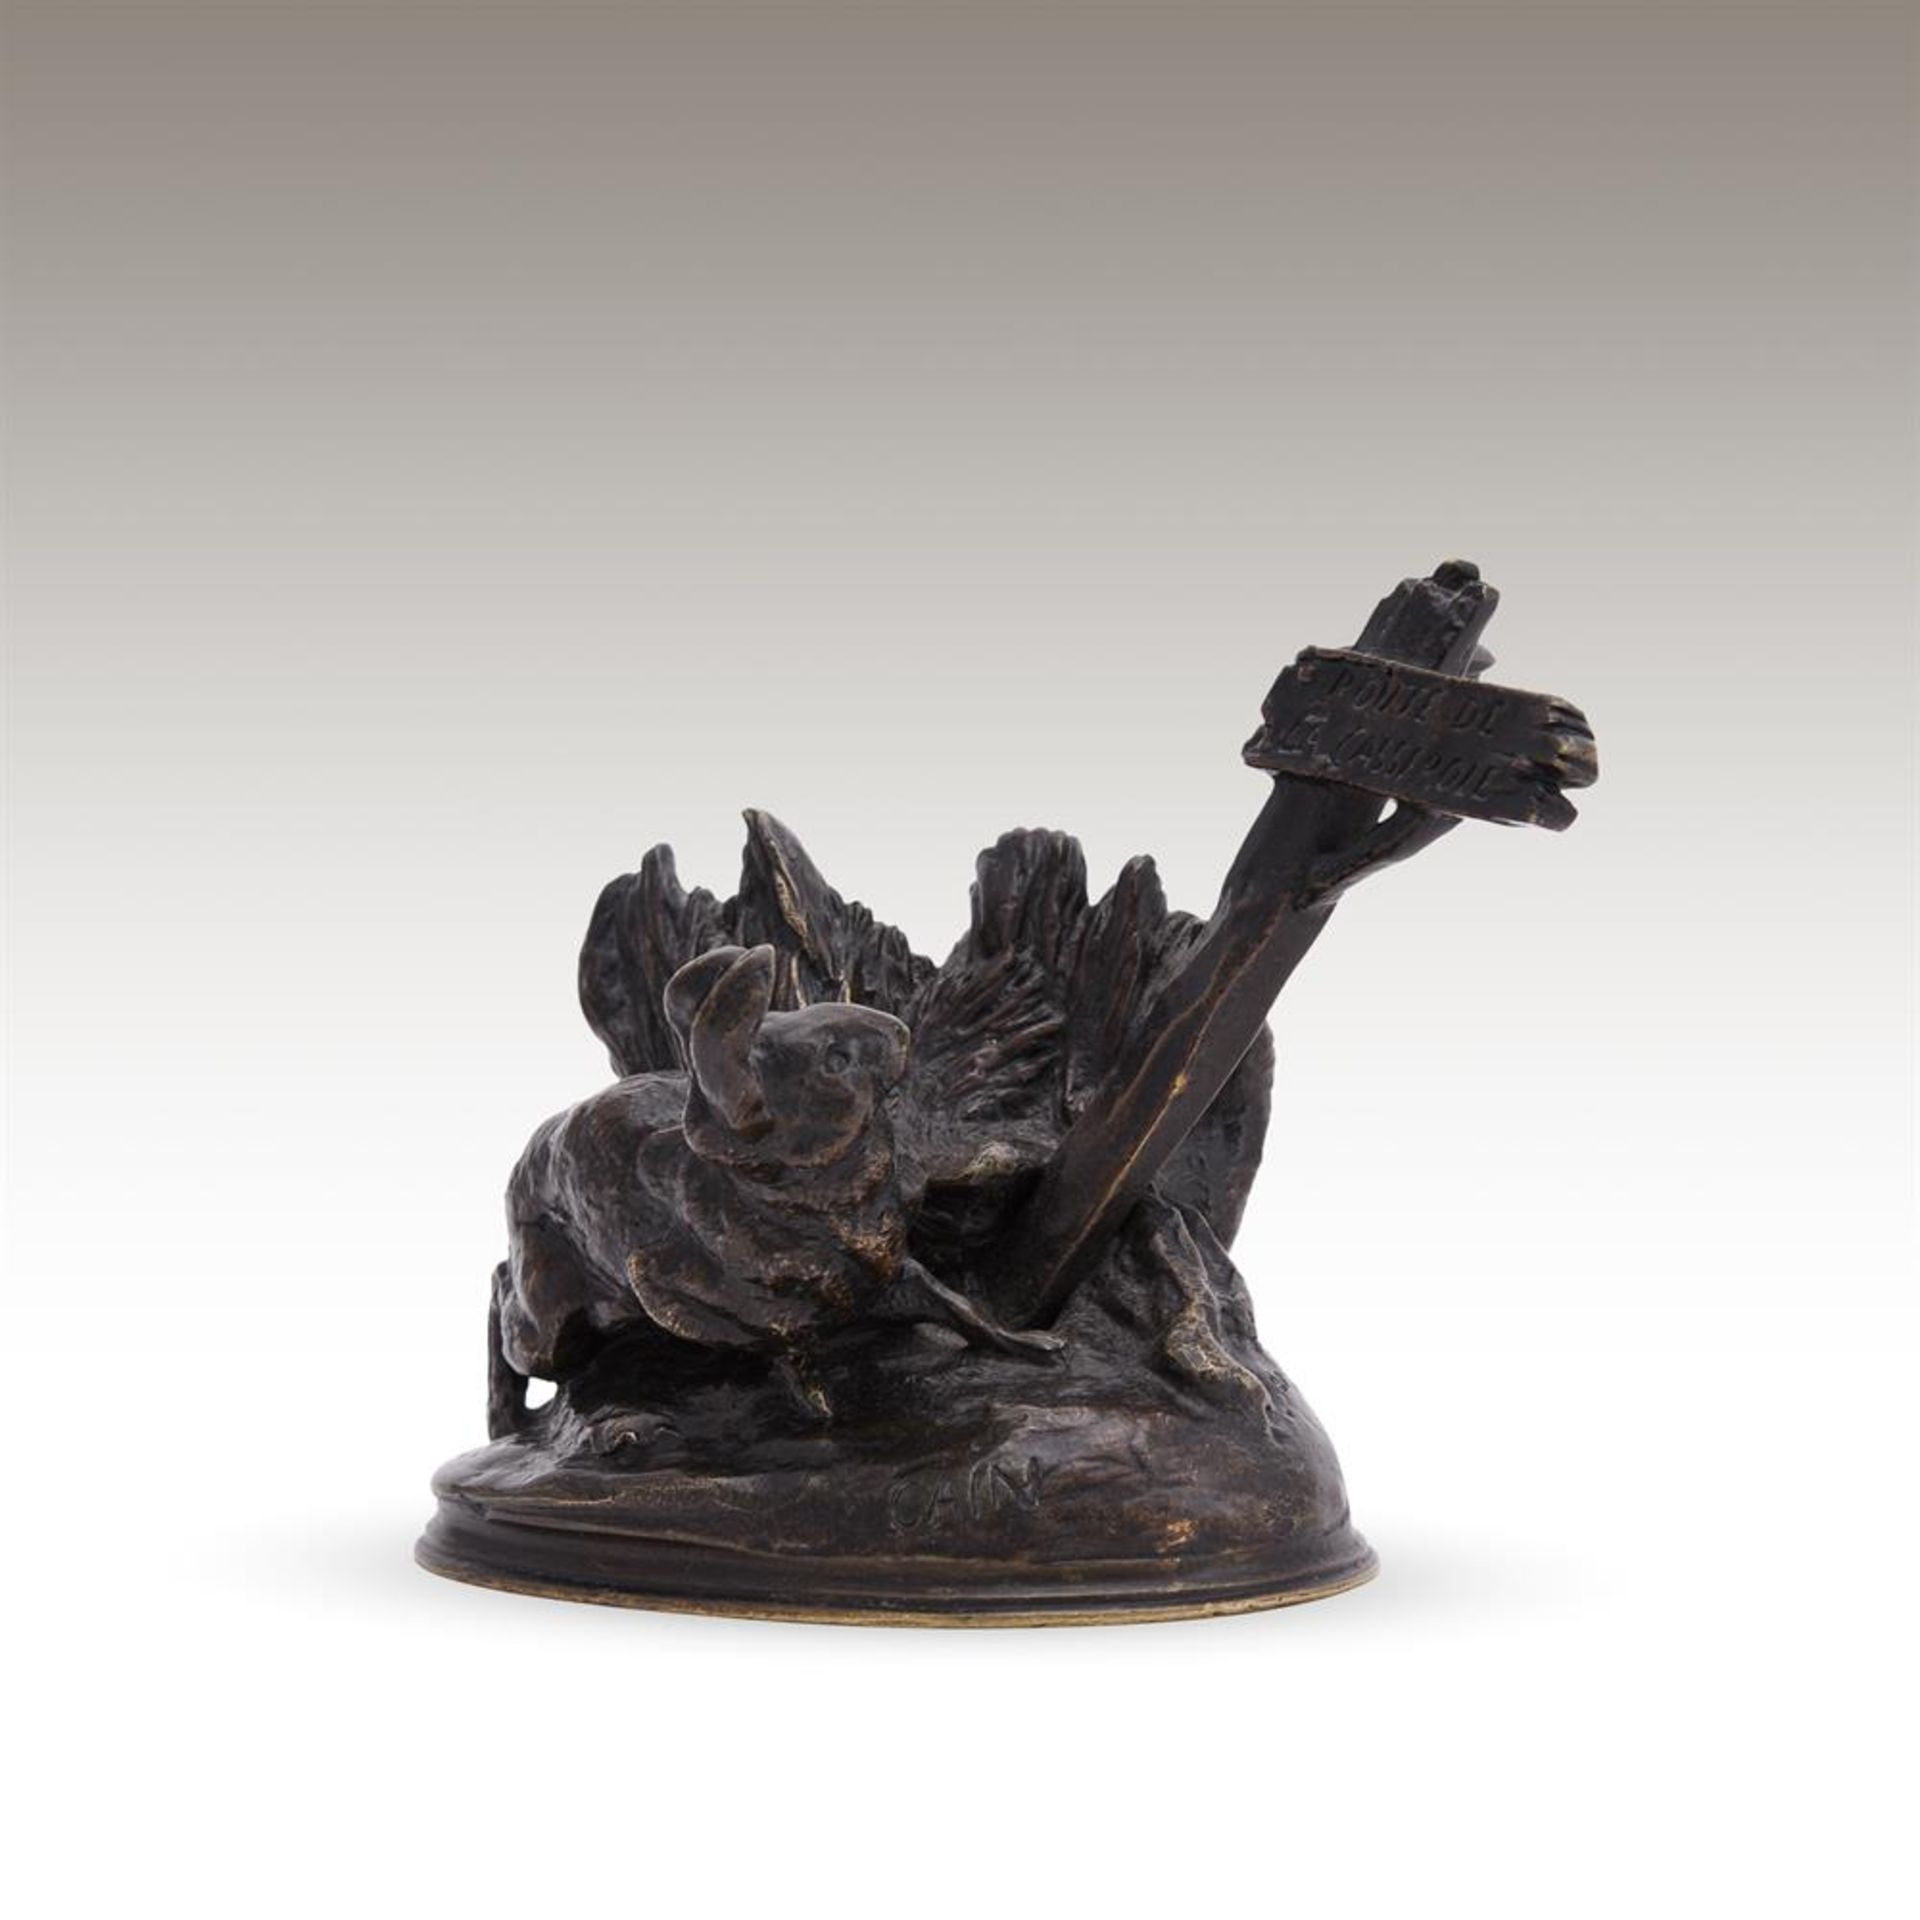 AUGUSTE CAIN (FRENCH, 1821-1894), A BRONZE MODEL OF A WORRIED RABBIT - Image 4 of 4